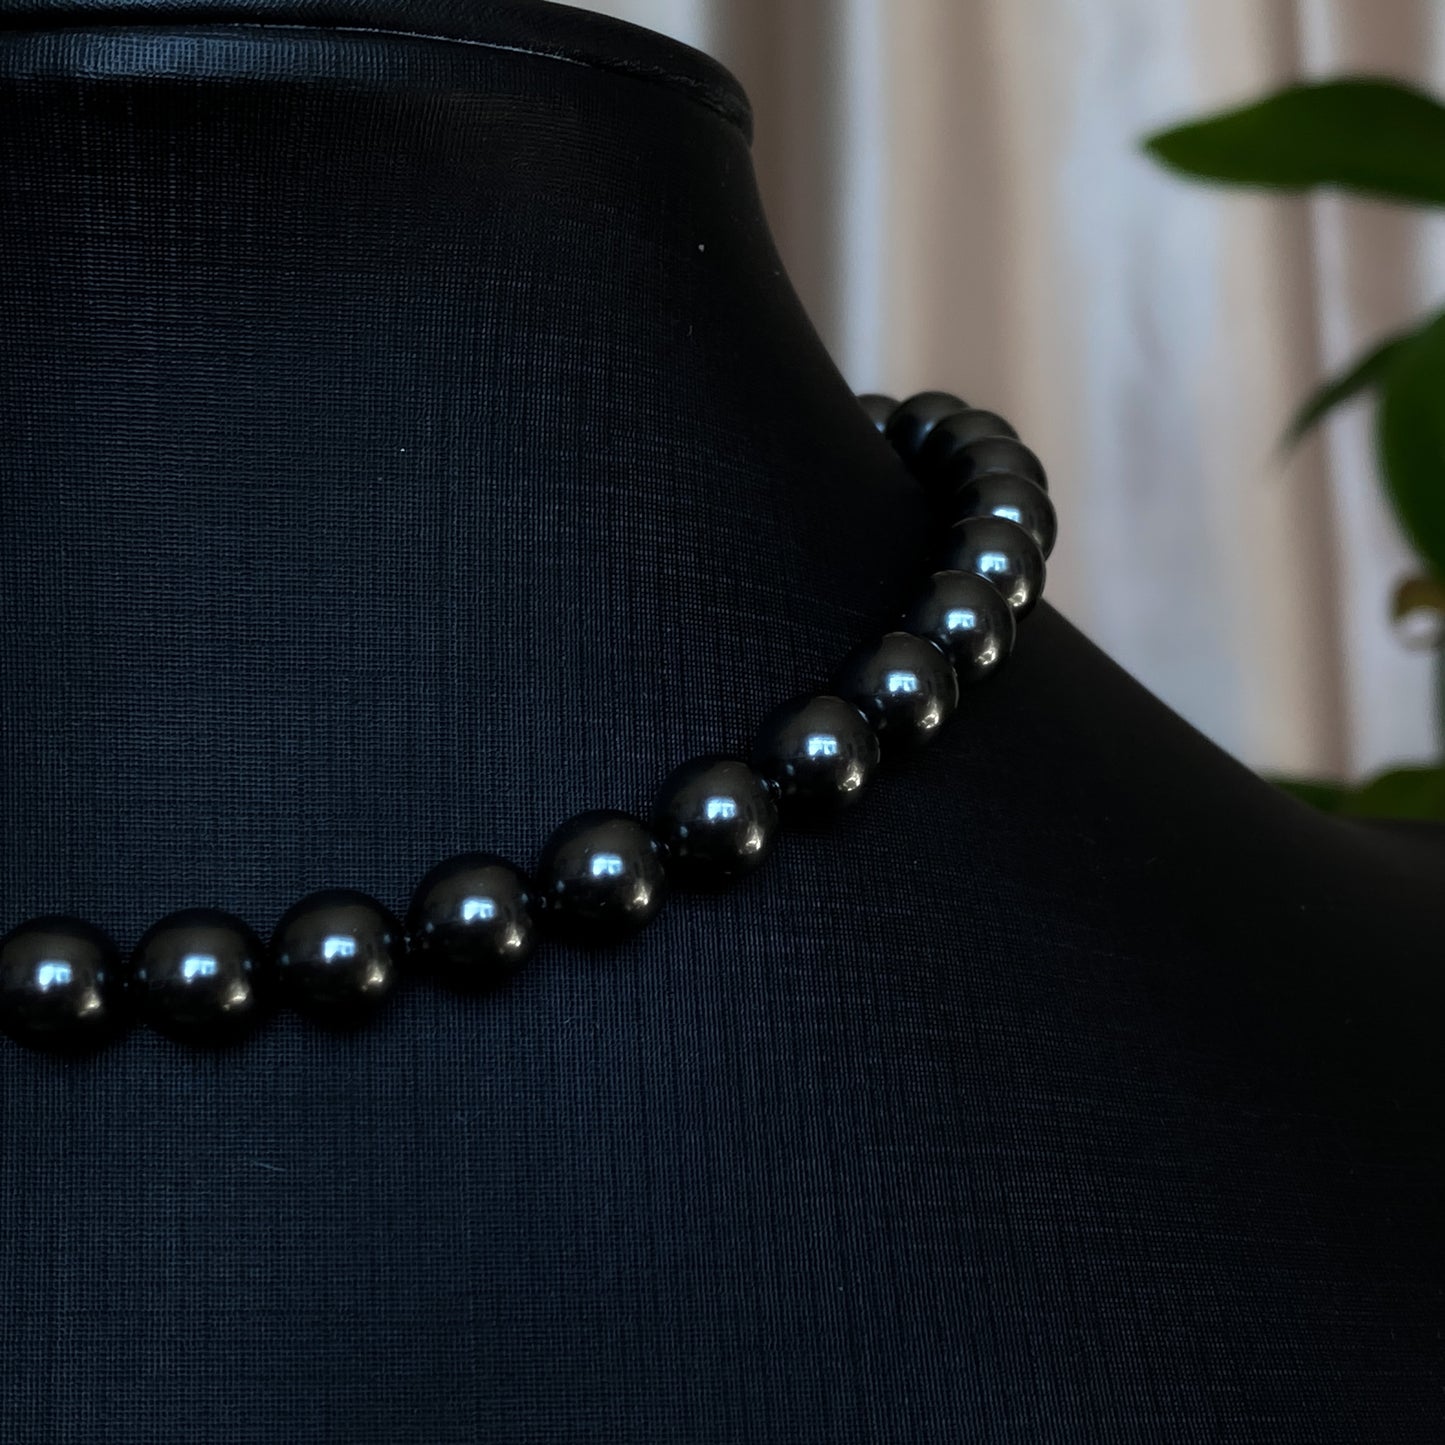 Tara ~ Dark Siren Black Pearl Choker with Glass Pearls, Antique Silver Shells and Stainless Steel